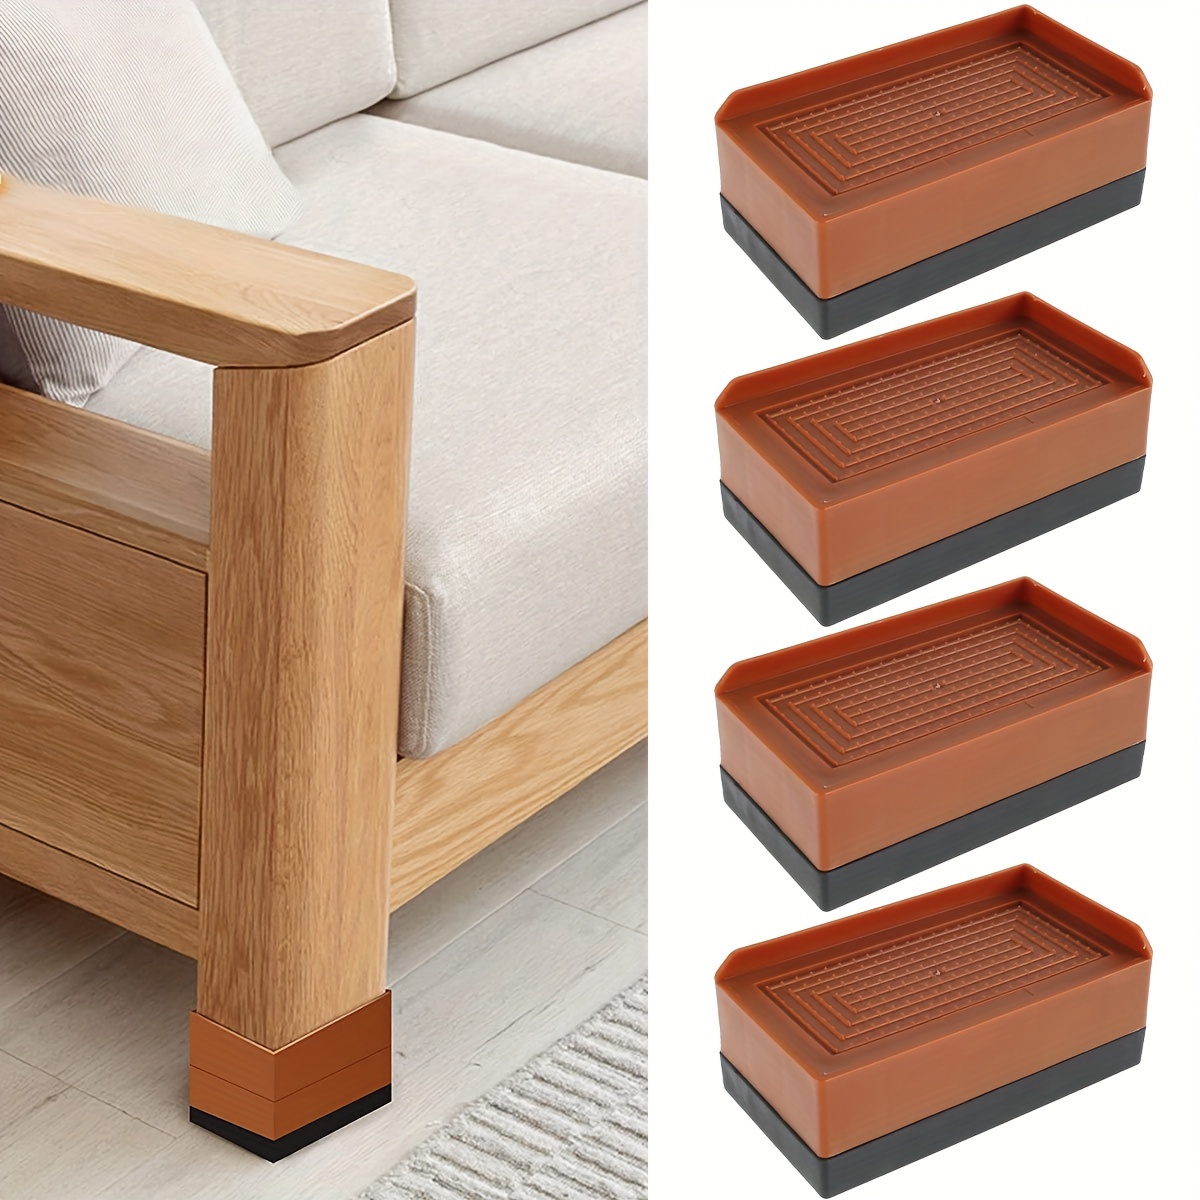 Ezer-Up Chair and Sofa Risers : sturdy, easy to install, and non slip.